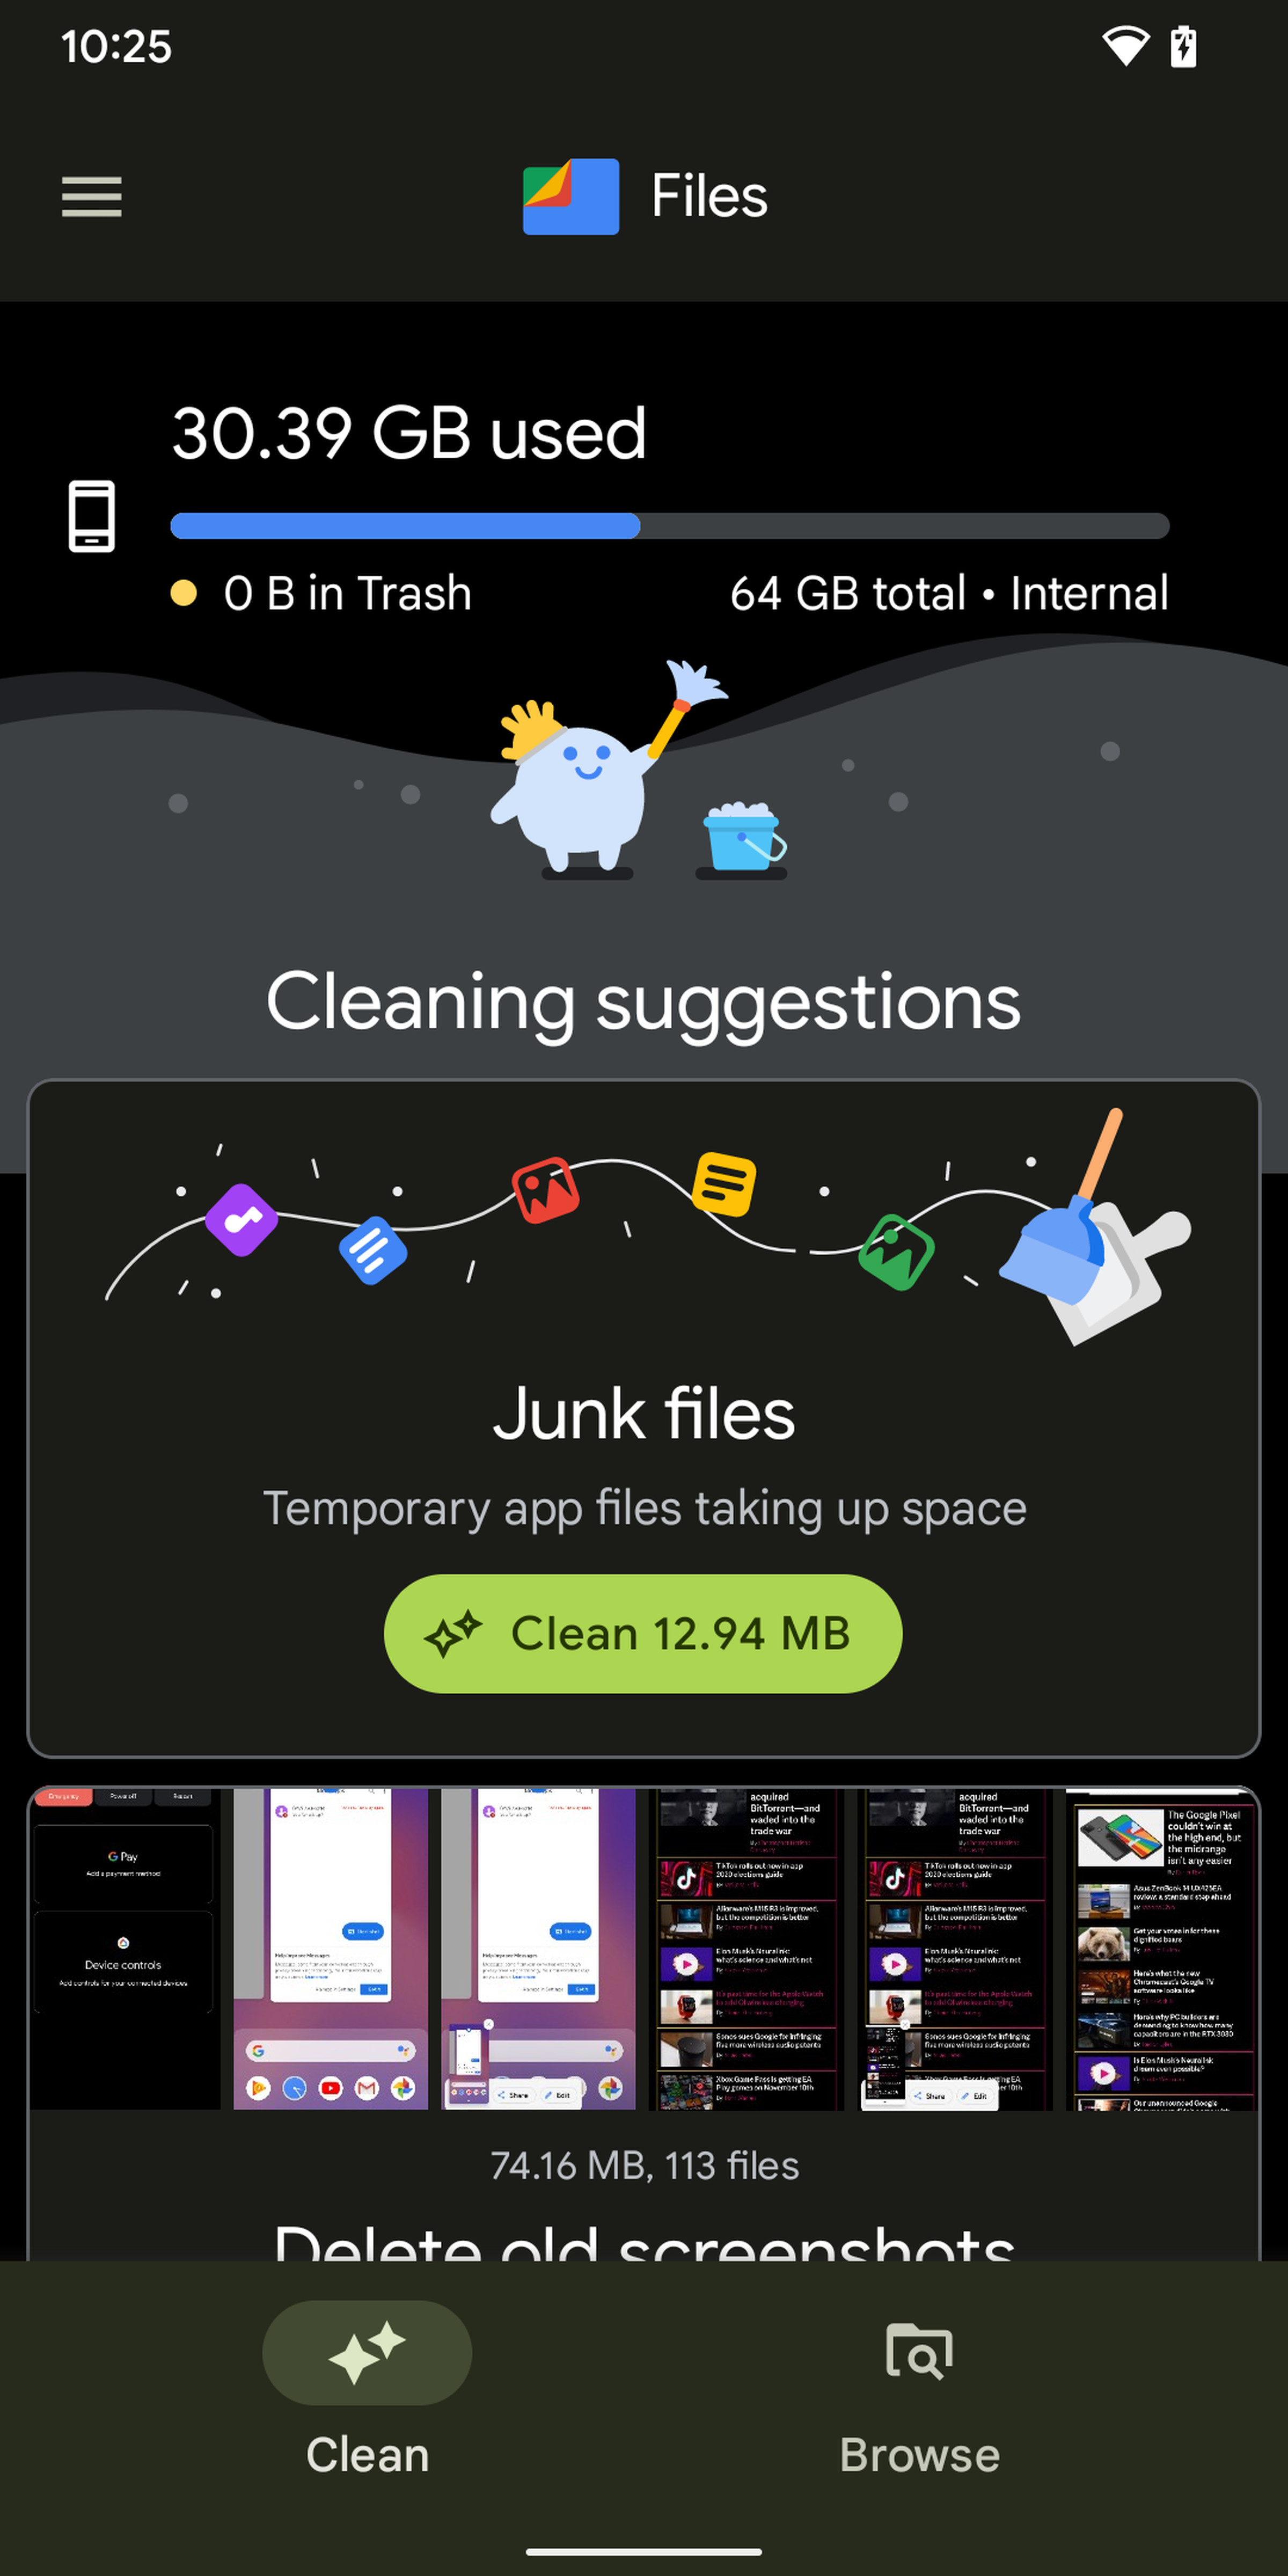 The Files app can offer a number of ways to clear out old files.